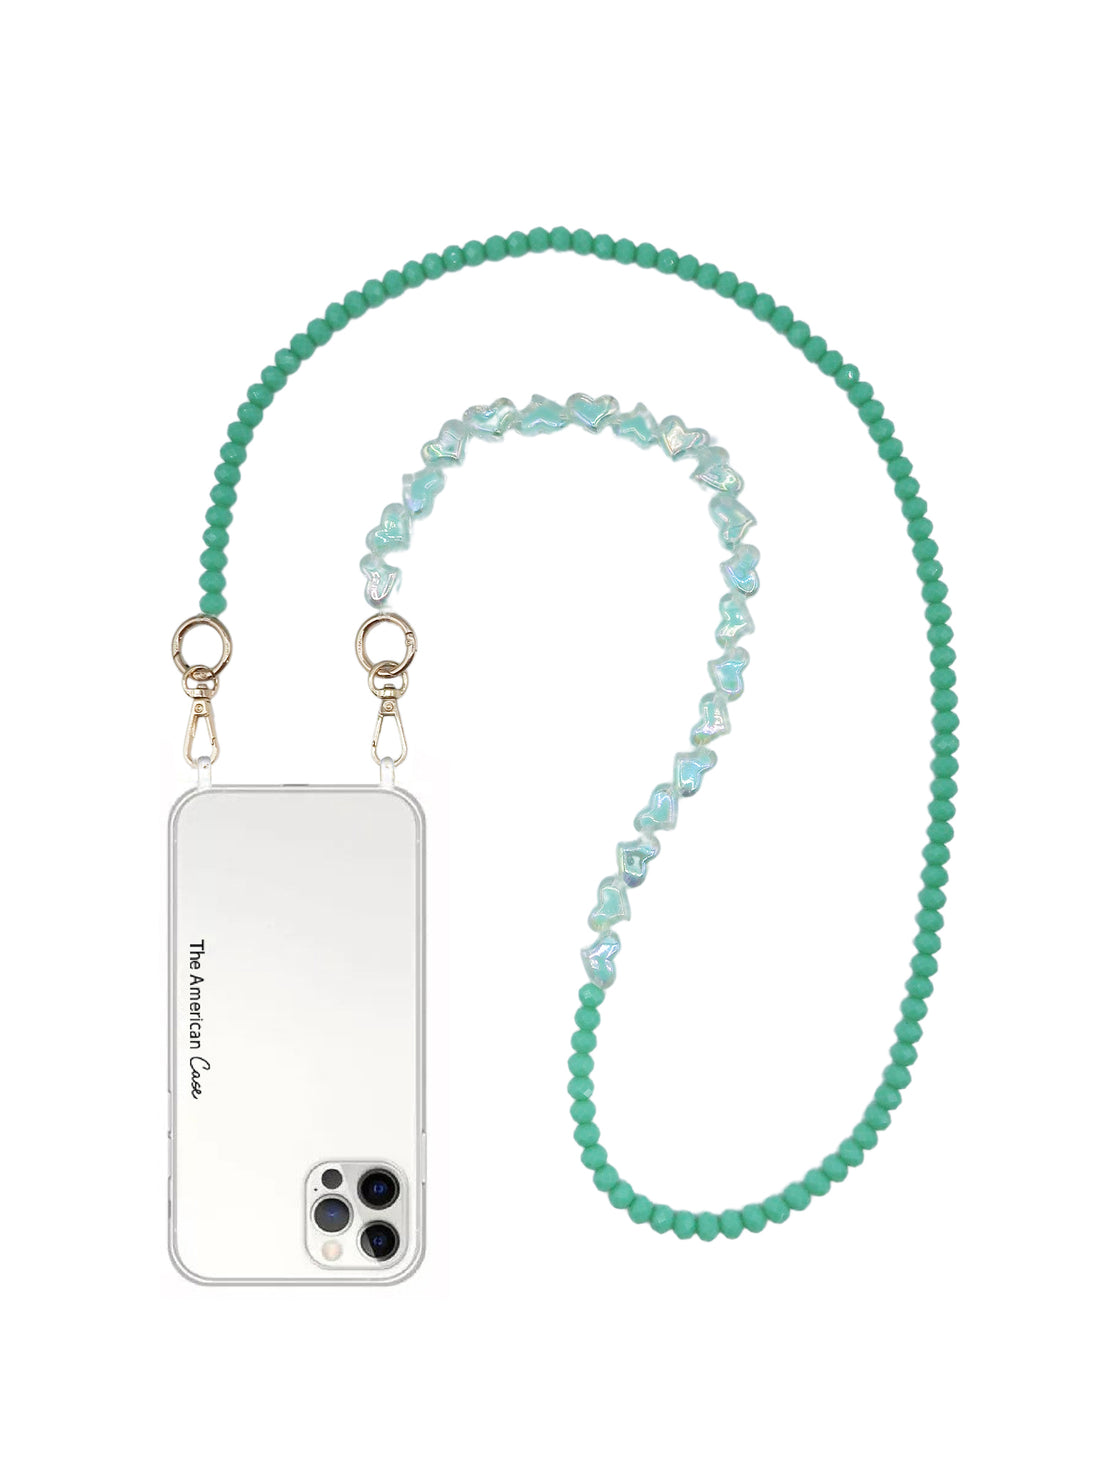 Lila - Vibrant Glitter Heart and Round Bead Crossbody Chain with Golden Carabiners